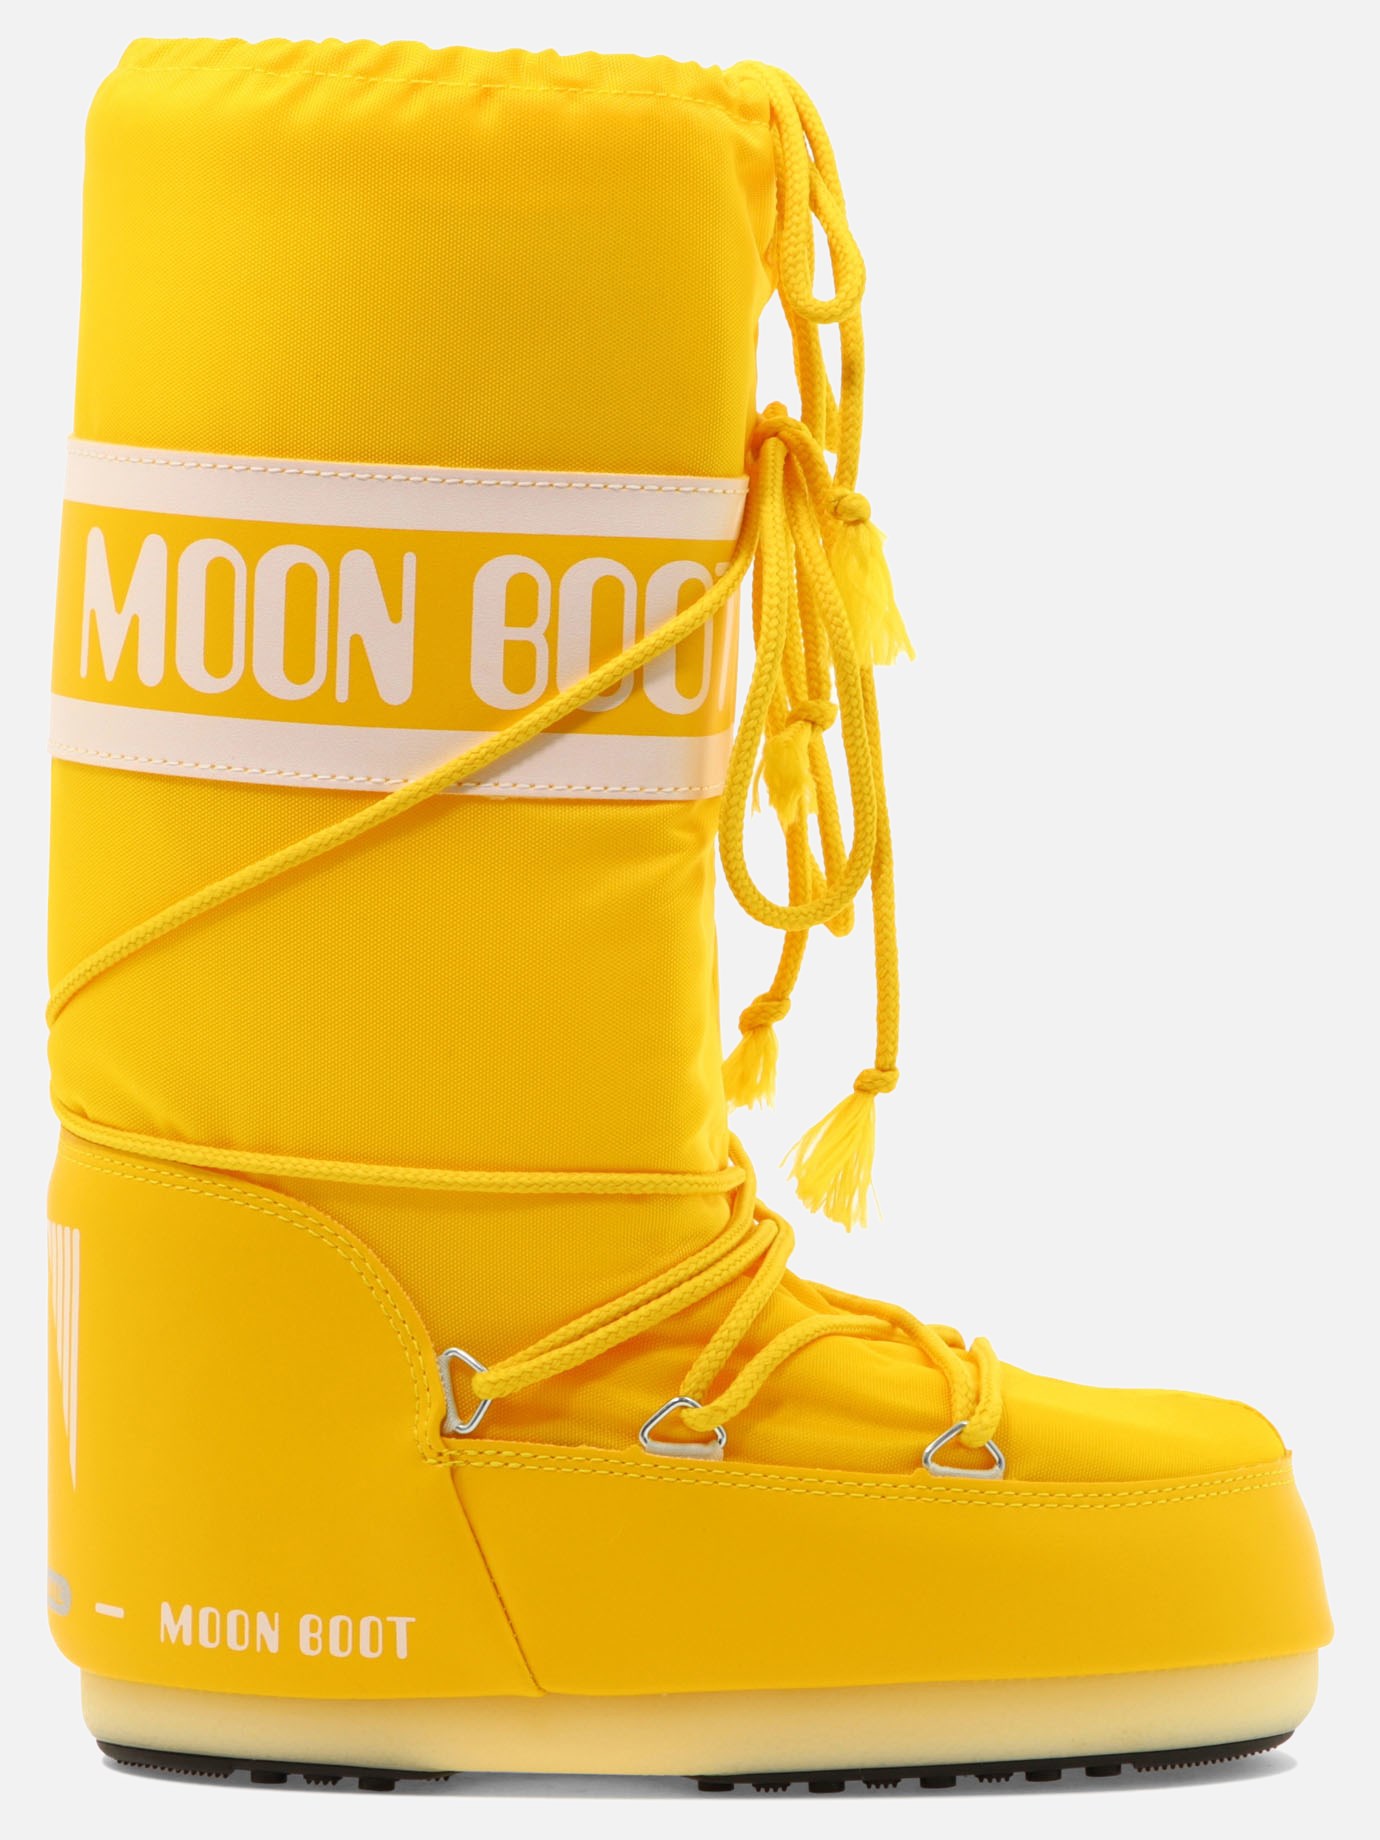  Nylon  after-ski bootsby Moon Boot - 1